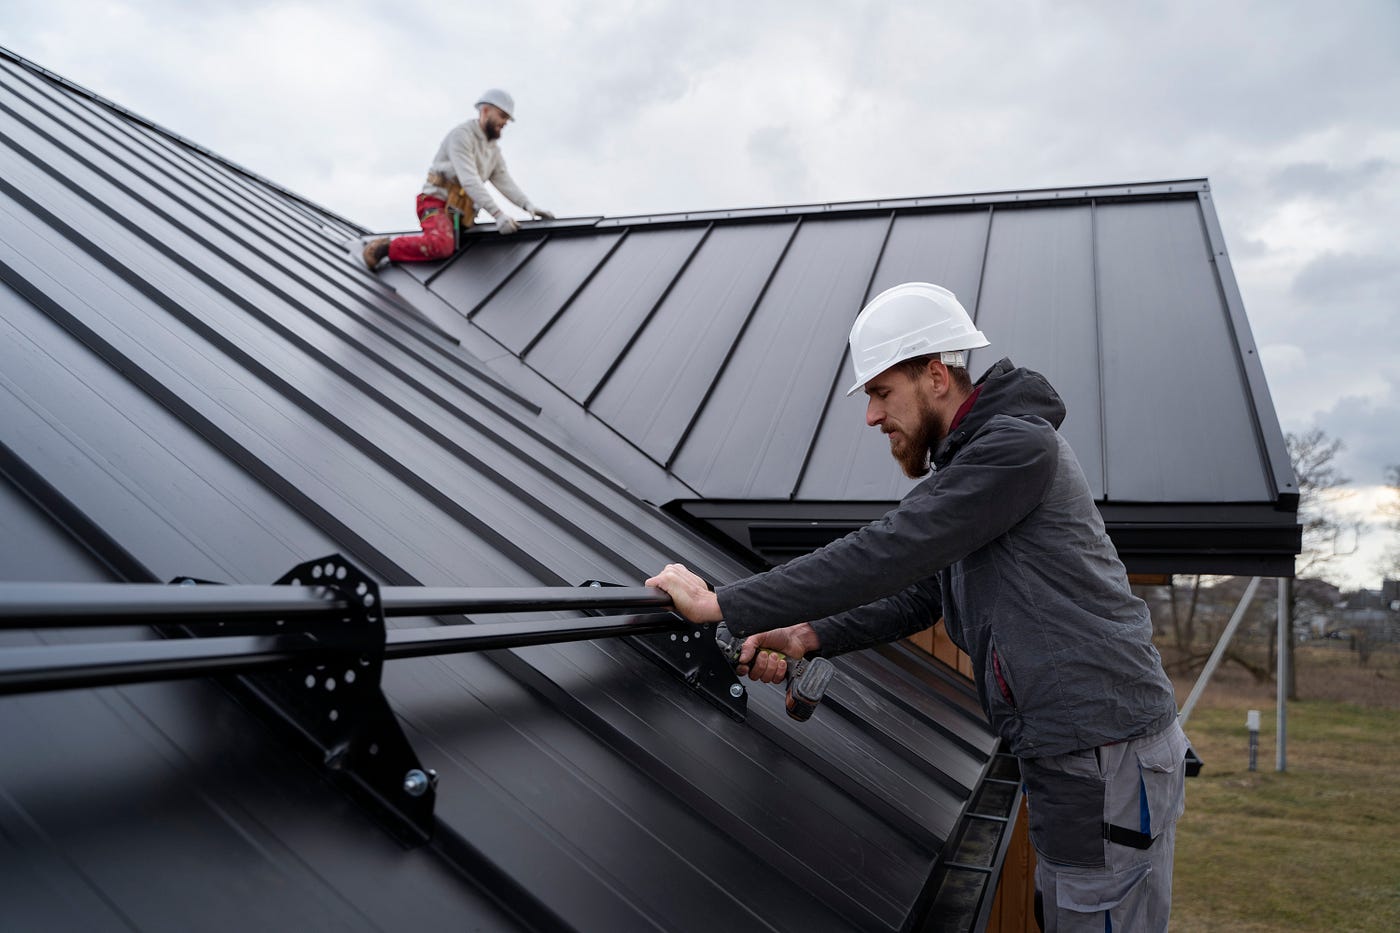 Choosing the Right Roofing Material for Your Climate, by Roofers4u